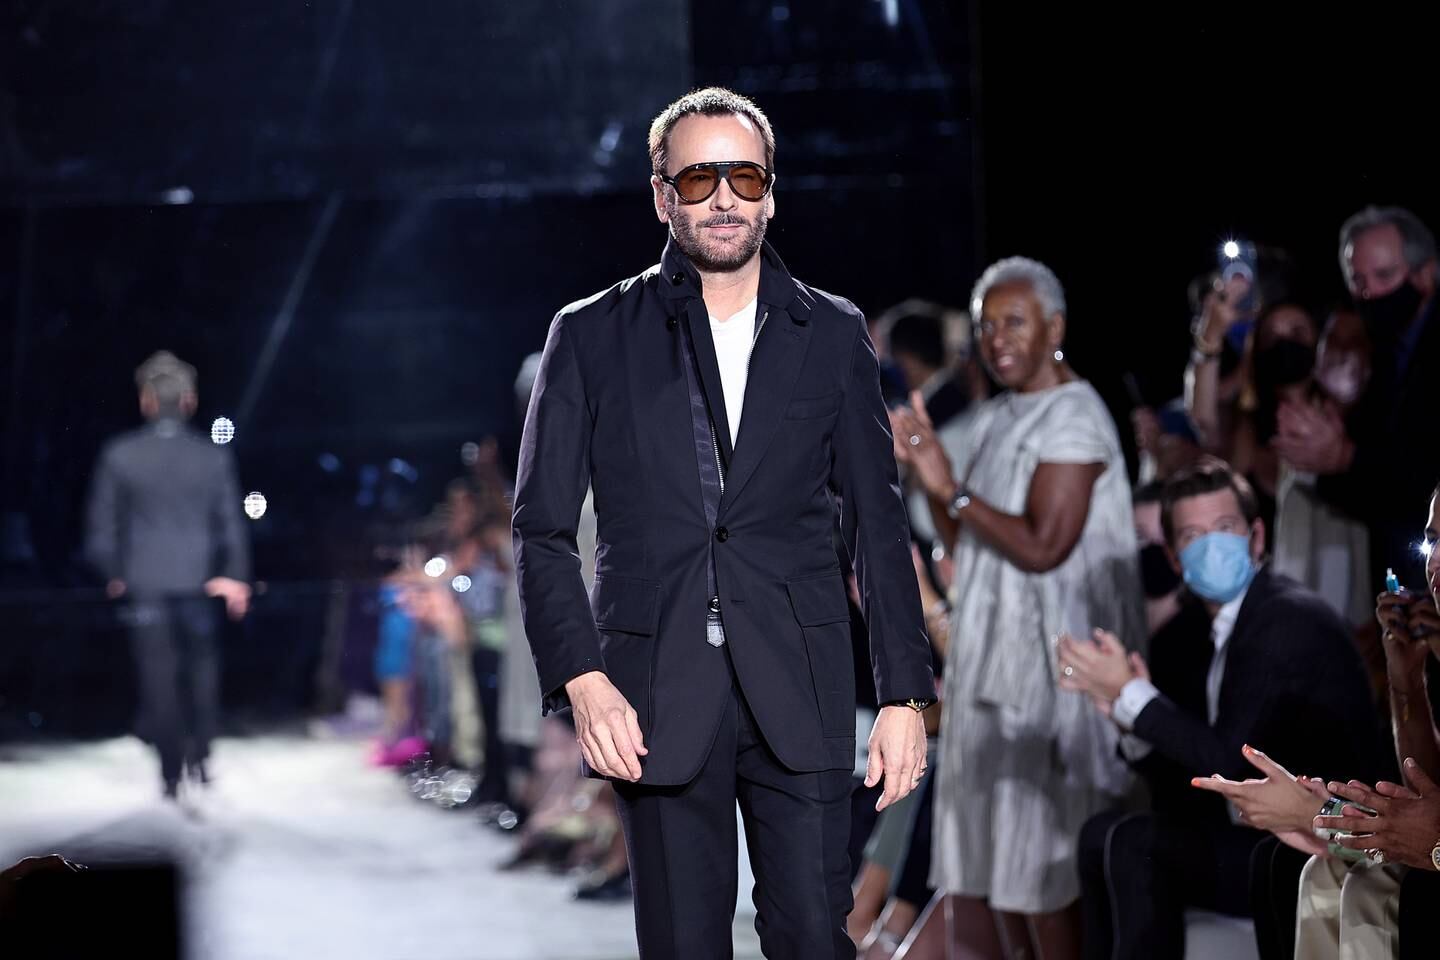 Tom Ford walks the runway at his September 2021 show.